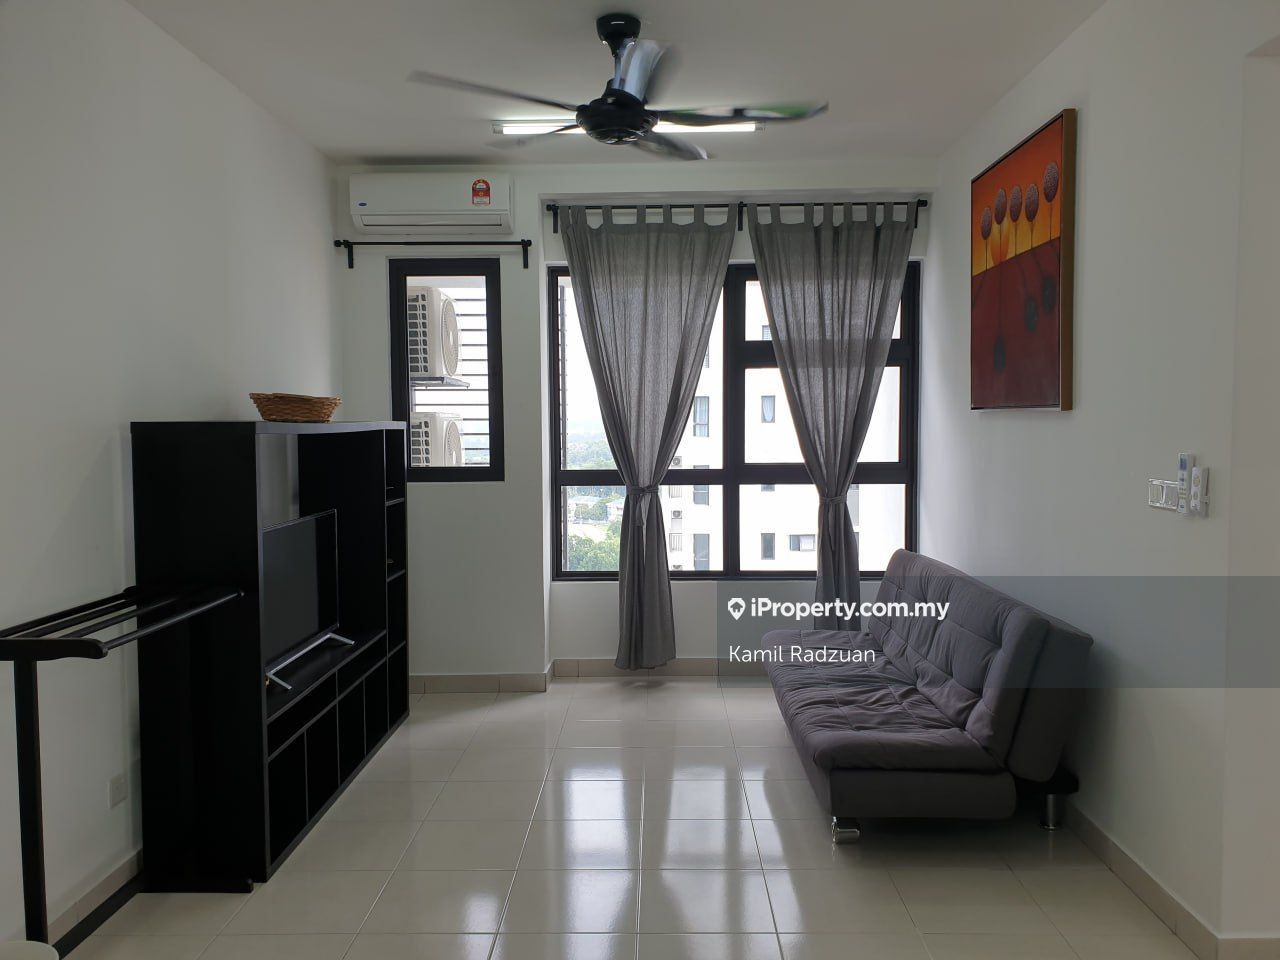 Tiara Imperio Residence Serviced Residence 2 bedrooms for rent in Bangi ...